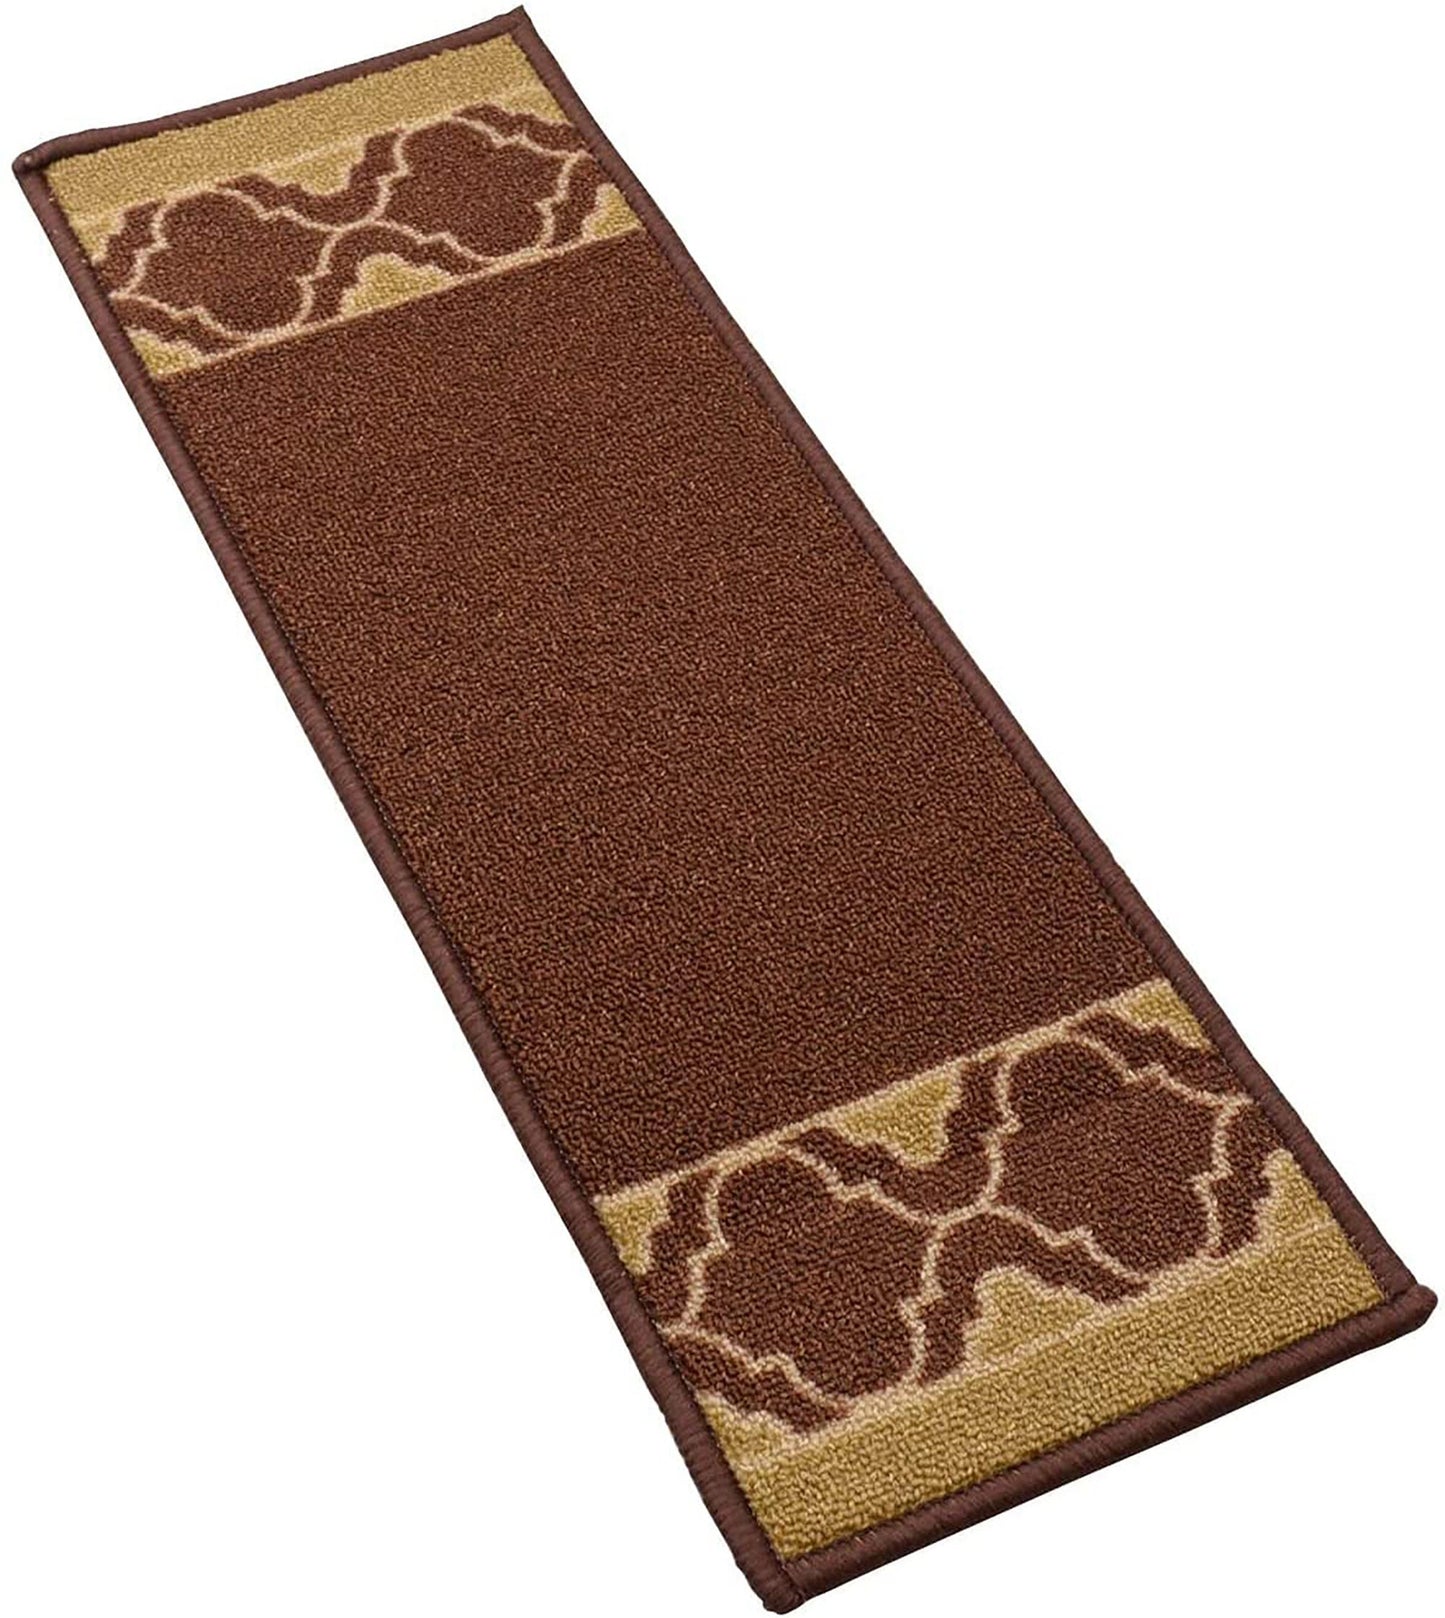 Machine Washable Stair Tread Trellis Bordered Brown Beige Skid Resistant Latex Back Carpet Stair Treads Size 8.5" x 26" Many Set Options